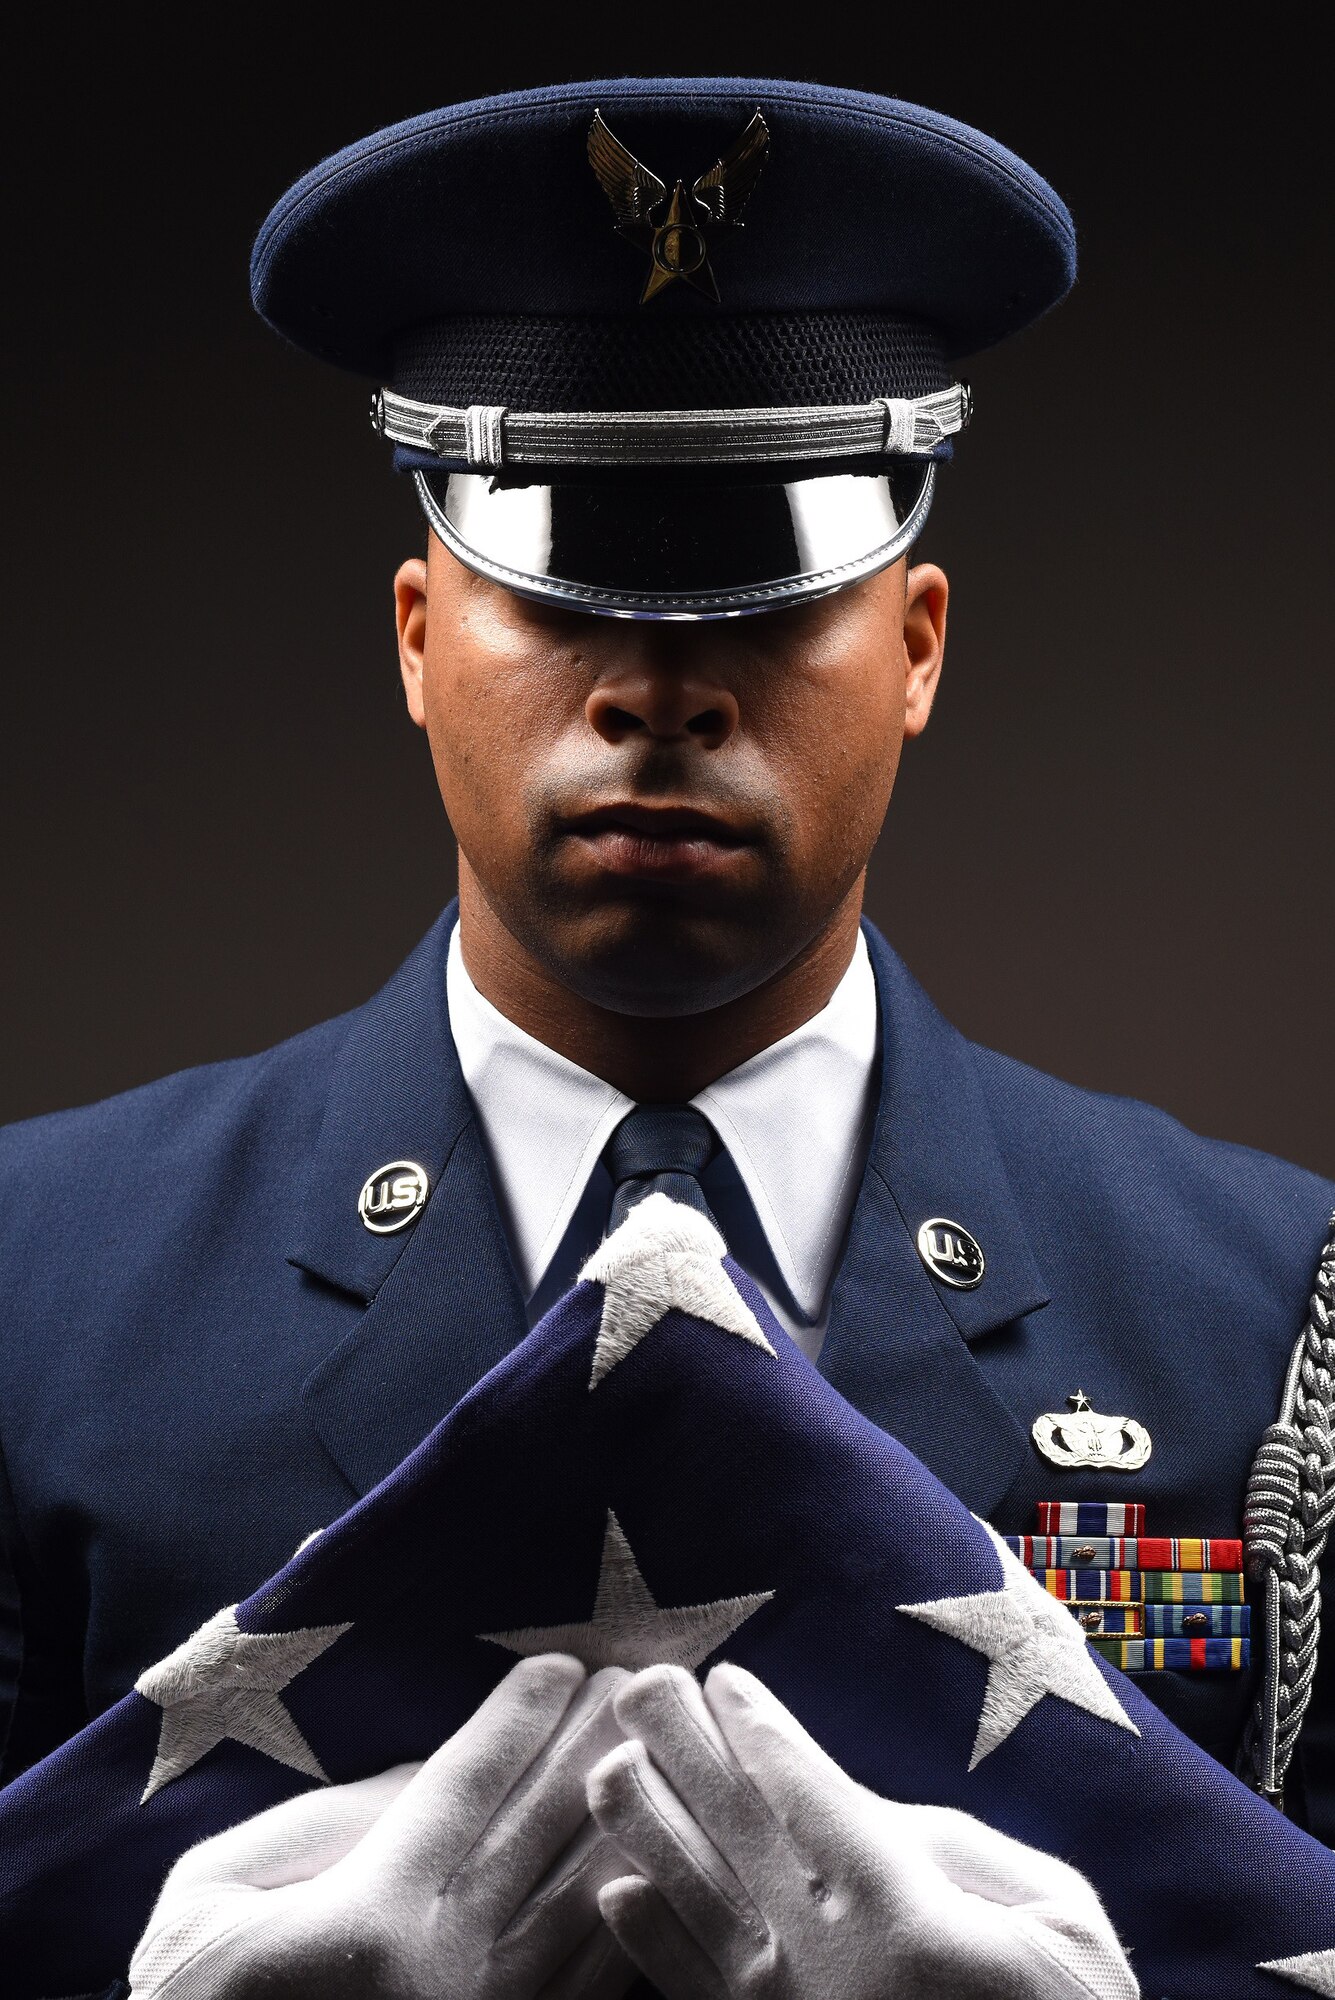 Staff Sgt. Alonzo Clark, 319th Air Base Wing Honor Guard program manager, grips a folded flag of the United States of America to his chest June 5, 2019, on Grand Forks Air Force Base, North Dakota. Clark manages the small, eight-person team of airmen on base, which has regional responsibility of 153,000 square-miles, to include North Dakota, Minnesota, Michigan and Wisconsin. Becoming a guardsman is an earned position of honor and duty, reserved only for members who strive to preserve the U.S. Air Force heritage. (U.S. Air Force photo illustration by Senior Airman Elora J. Martinez)